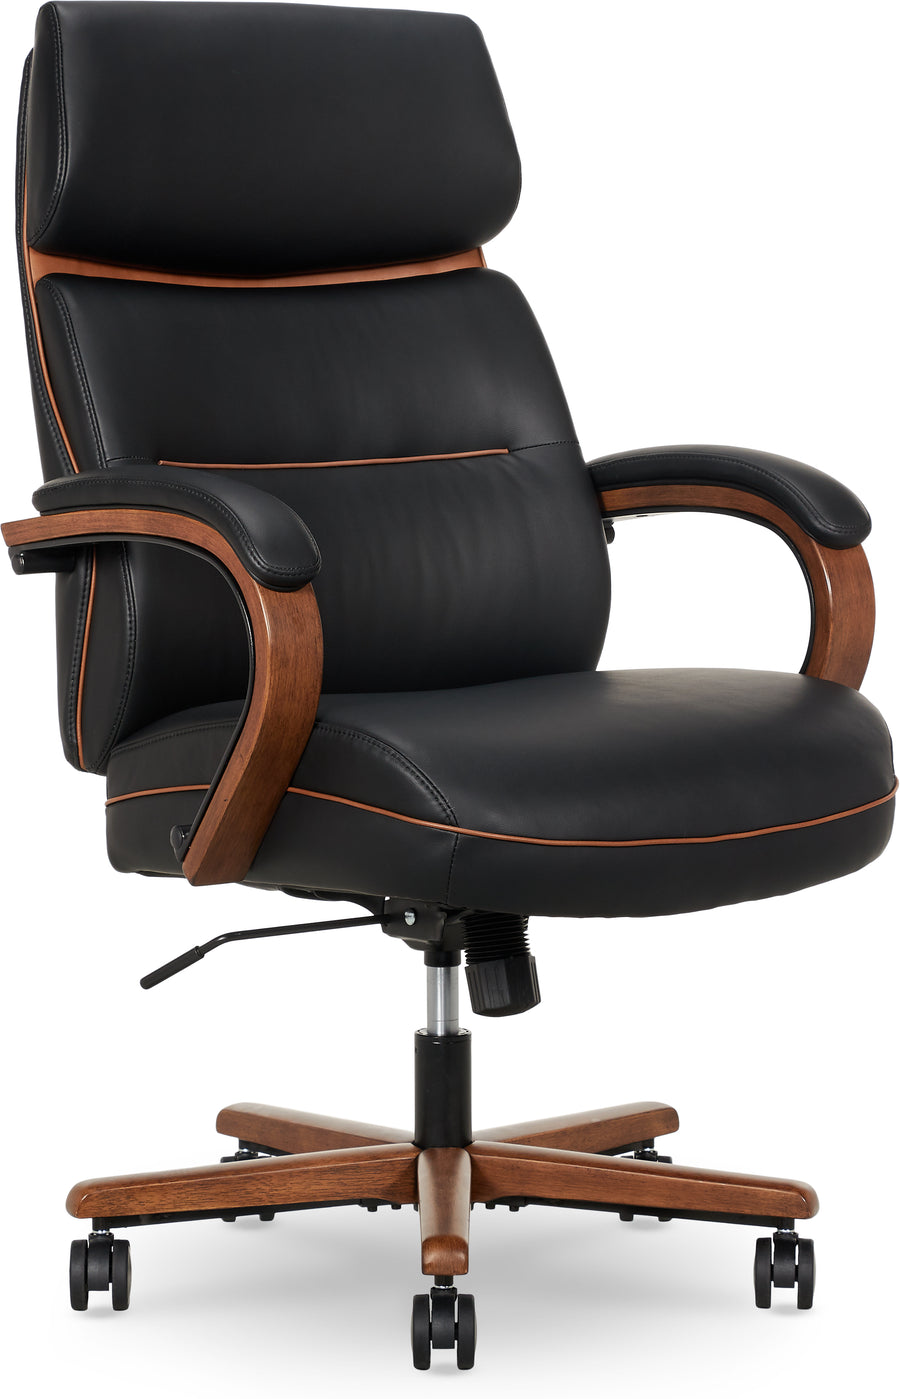 Finch Neo Two Retro-Modern Mid-Back Office Chair - Black_0